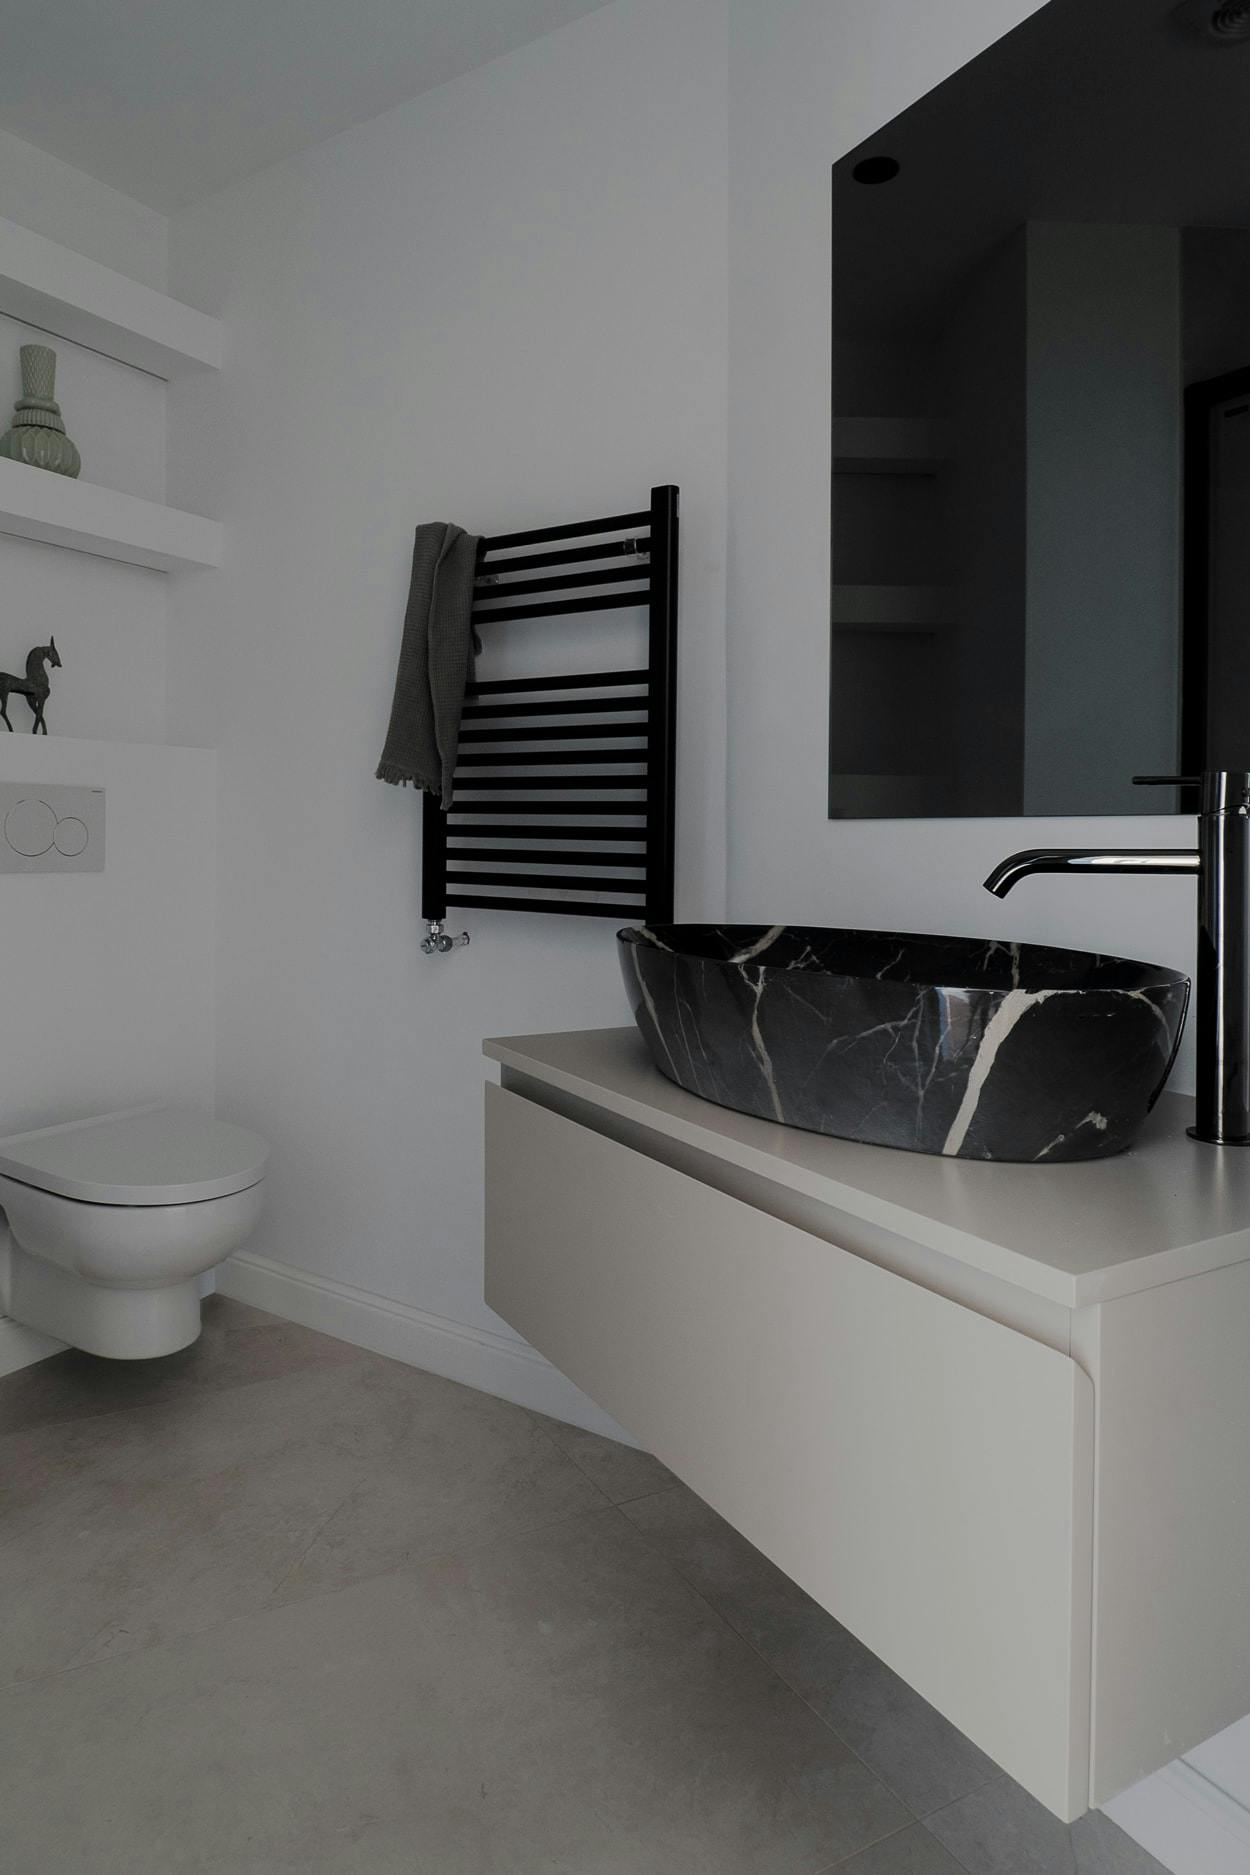 The image features a modern bathroom with a white sink, toilet, and large mirror.